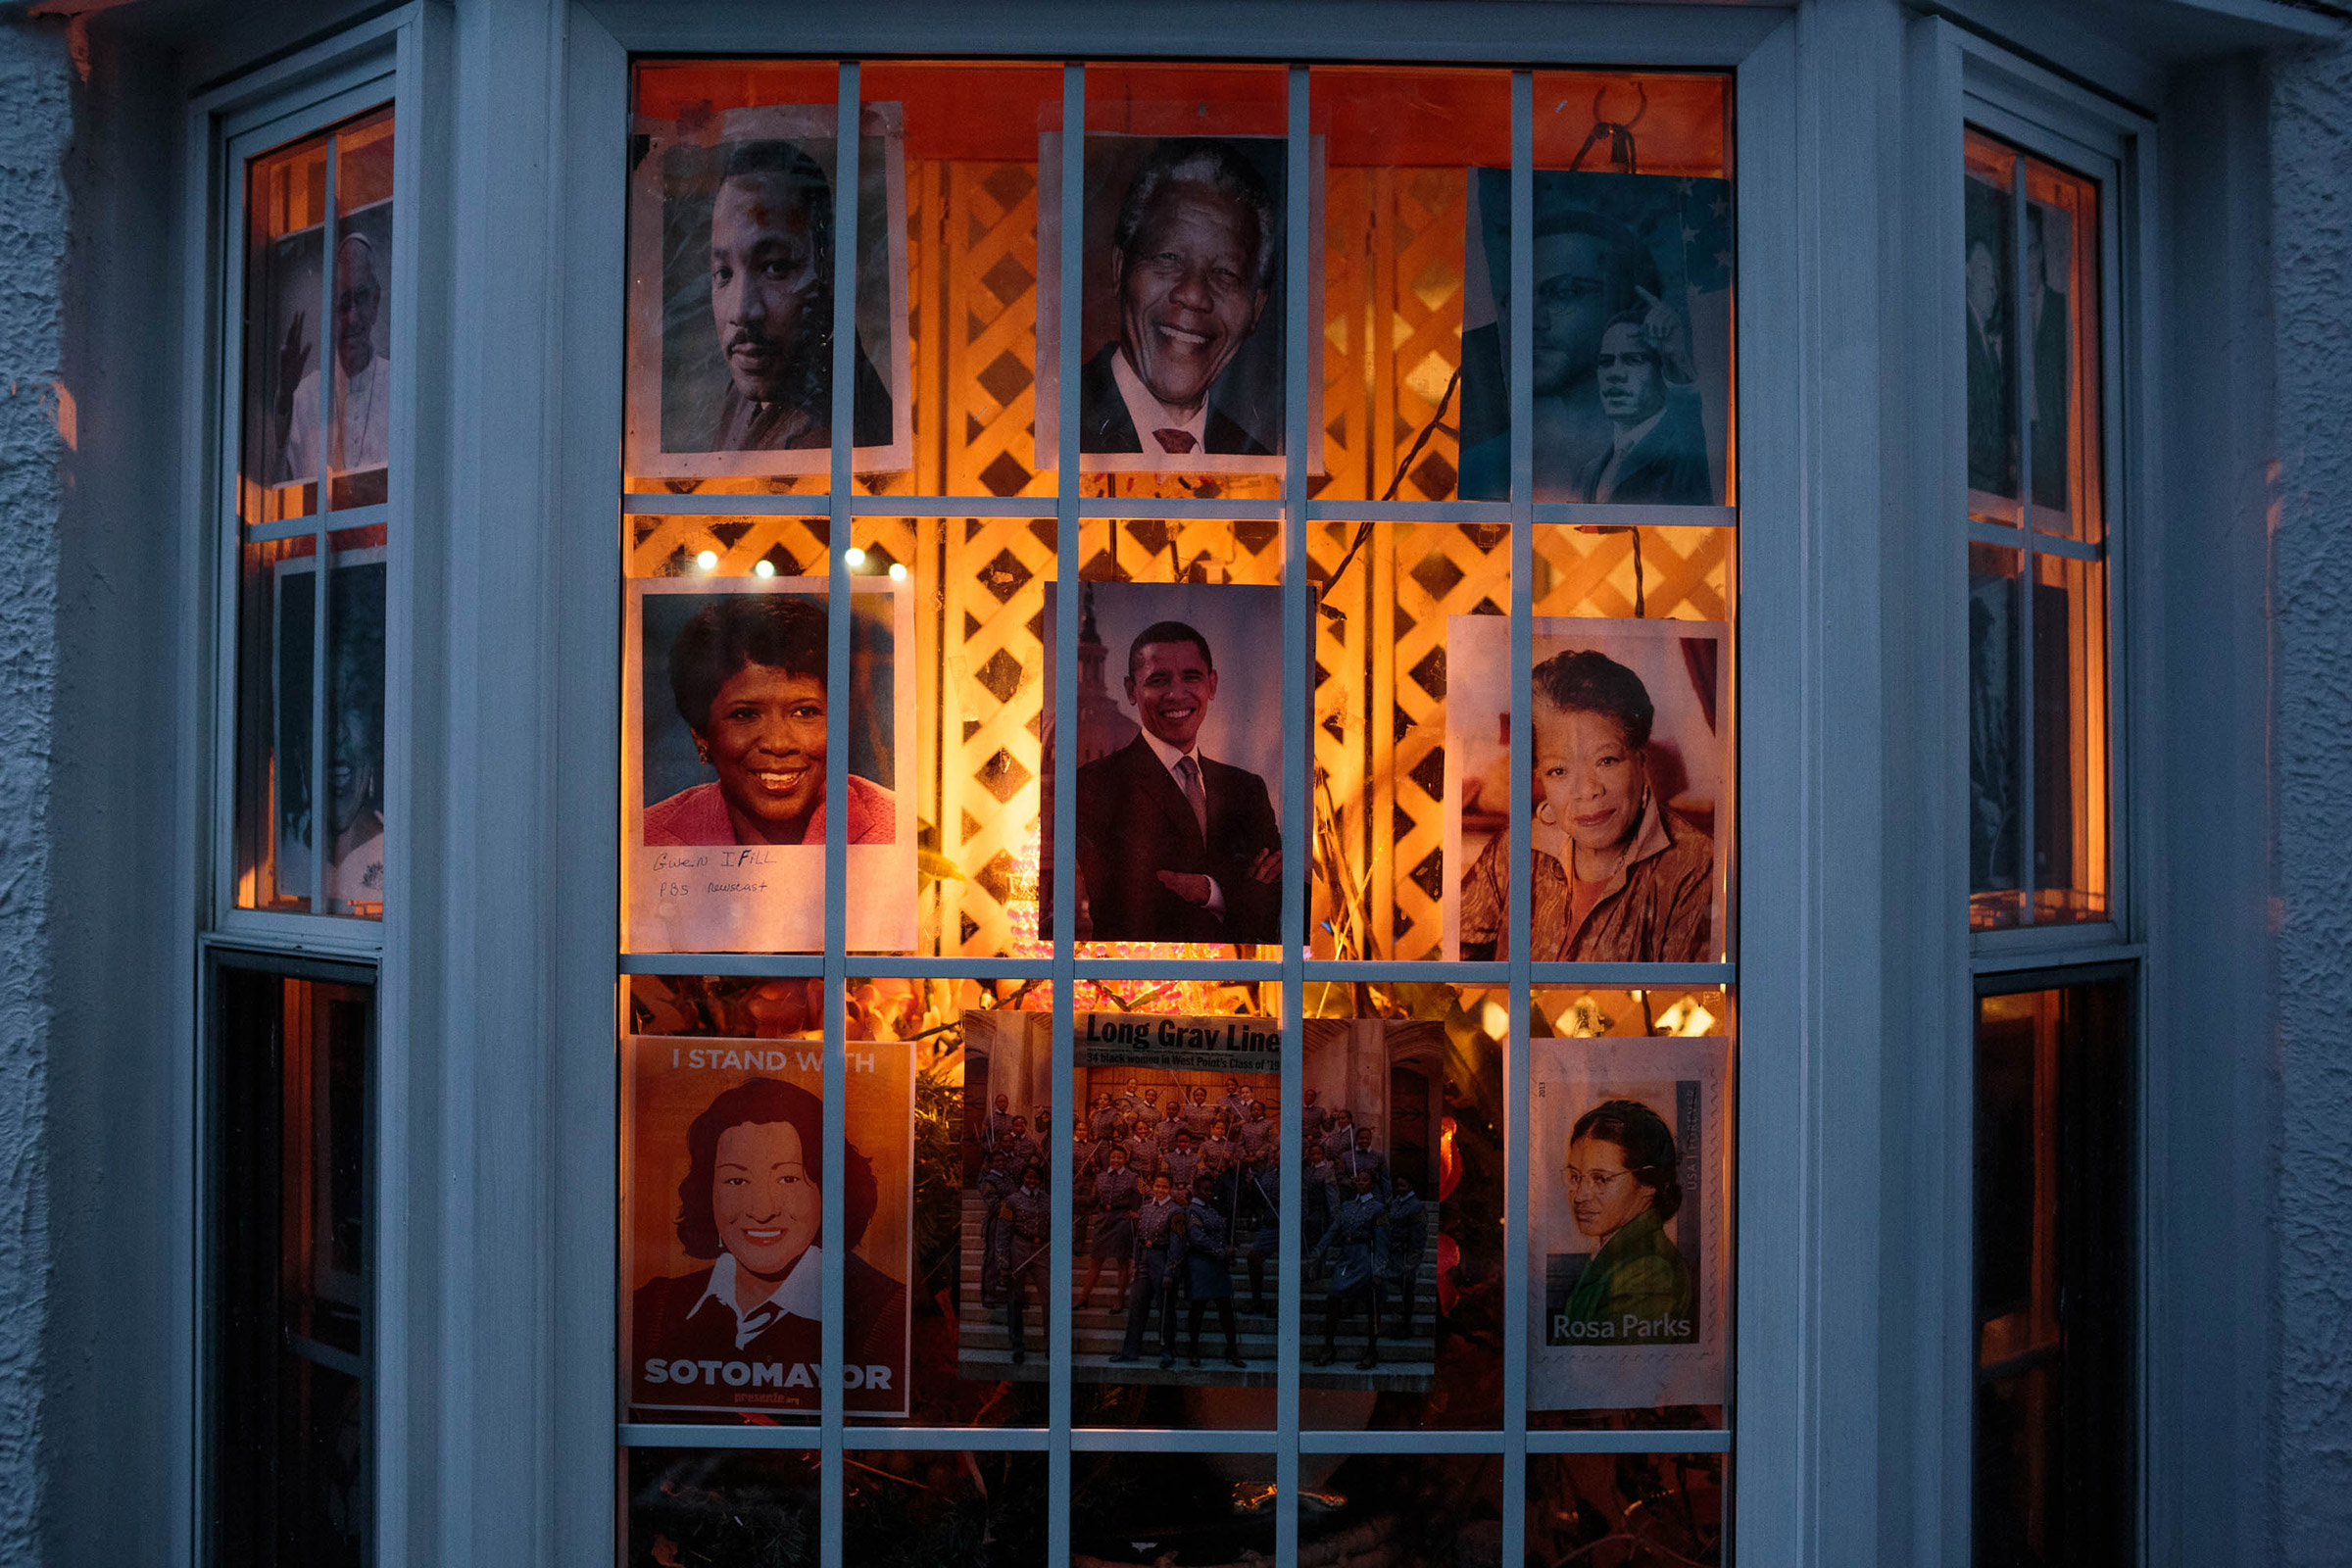 The front window of the Romey home in Bushwick is decorated with pictures of Blanche's idols, ranging from Obama, Rosa Parks, Pope Francis, and a recent photograph of young black women who were recently admitted into West Point. Blanche hopes that the young neighborhood kids walking by will notice them and find some inspiration. (Sarah Blesener)